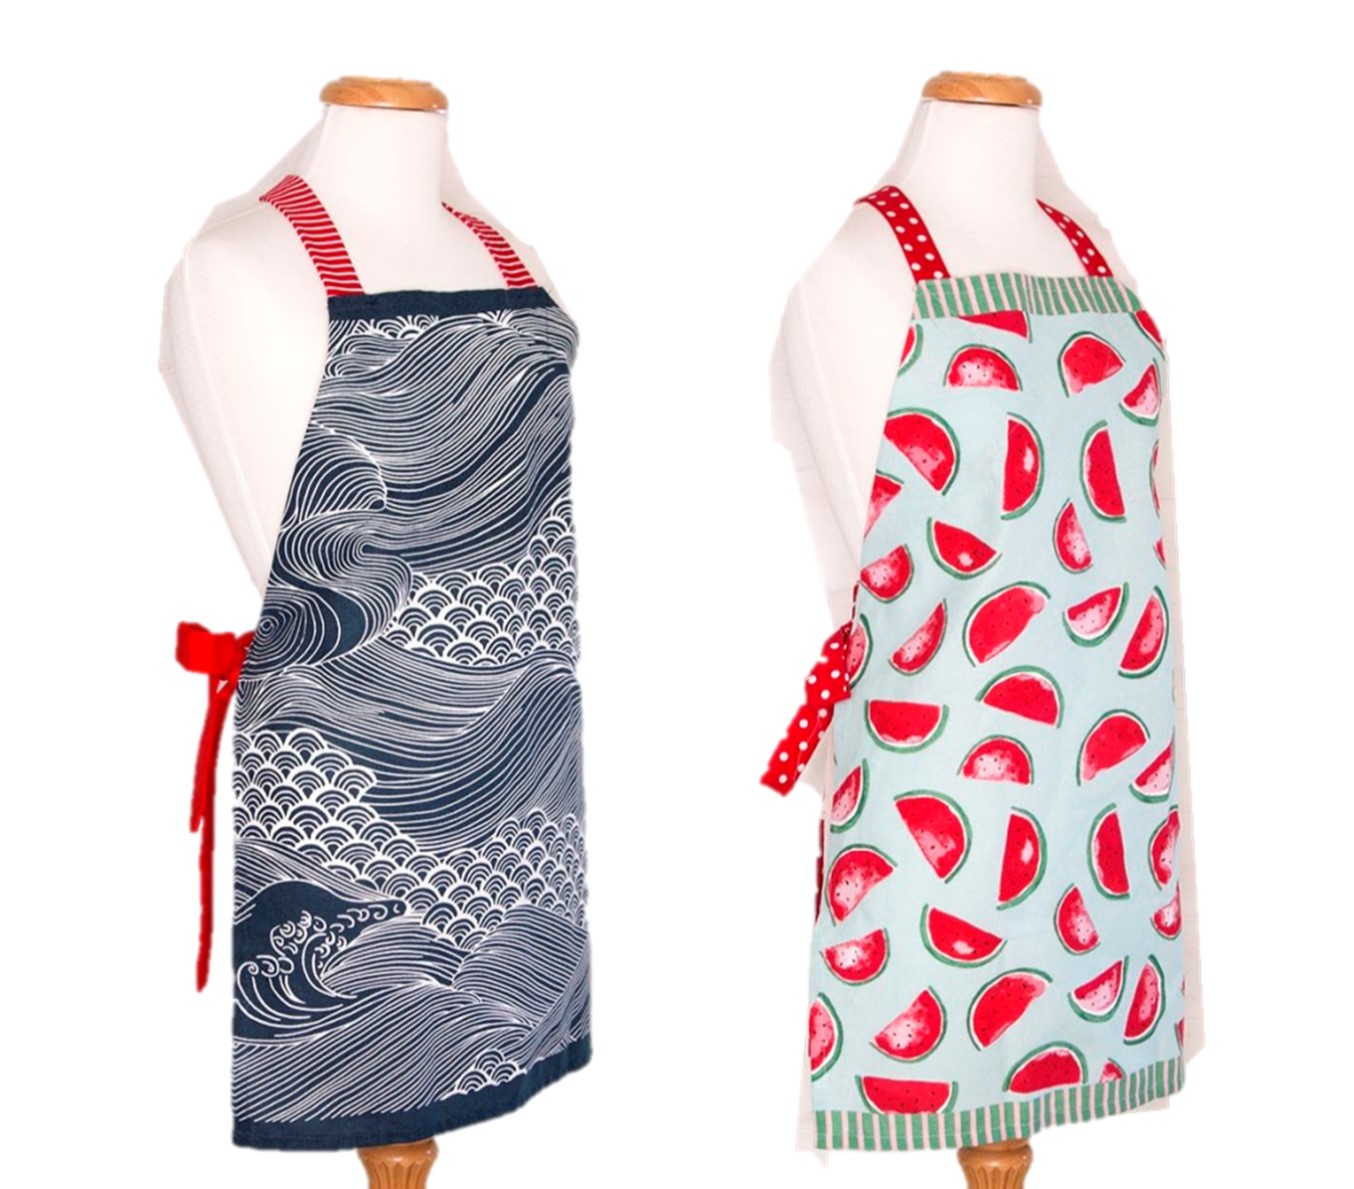 Photo of two aprons